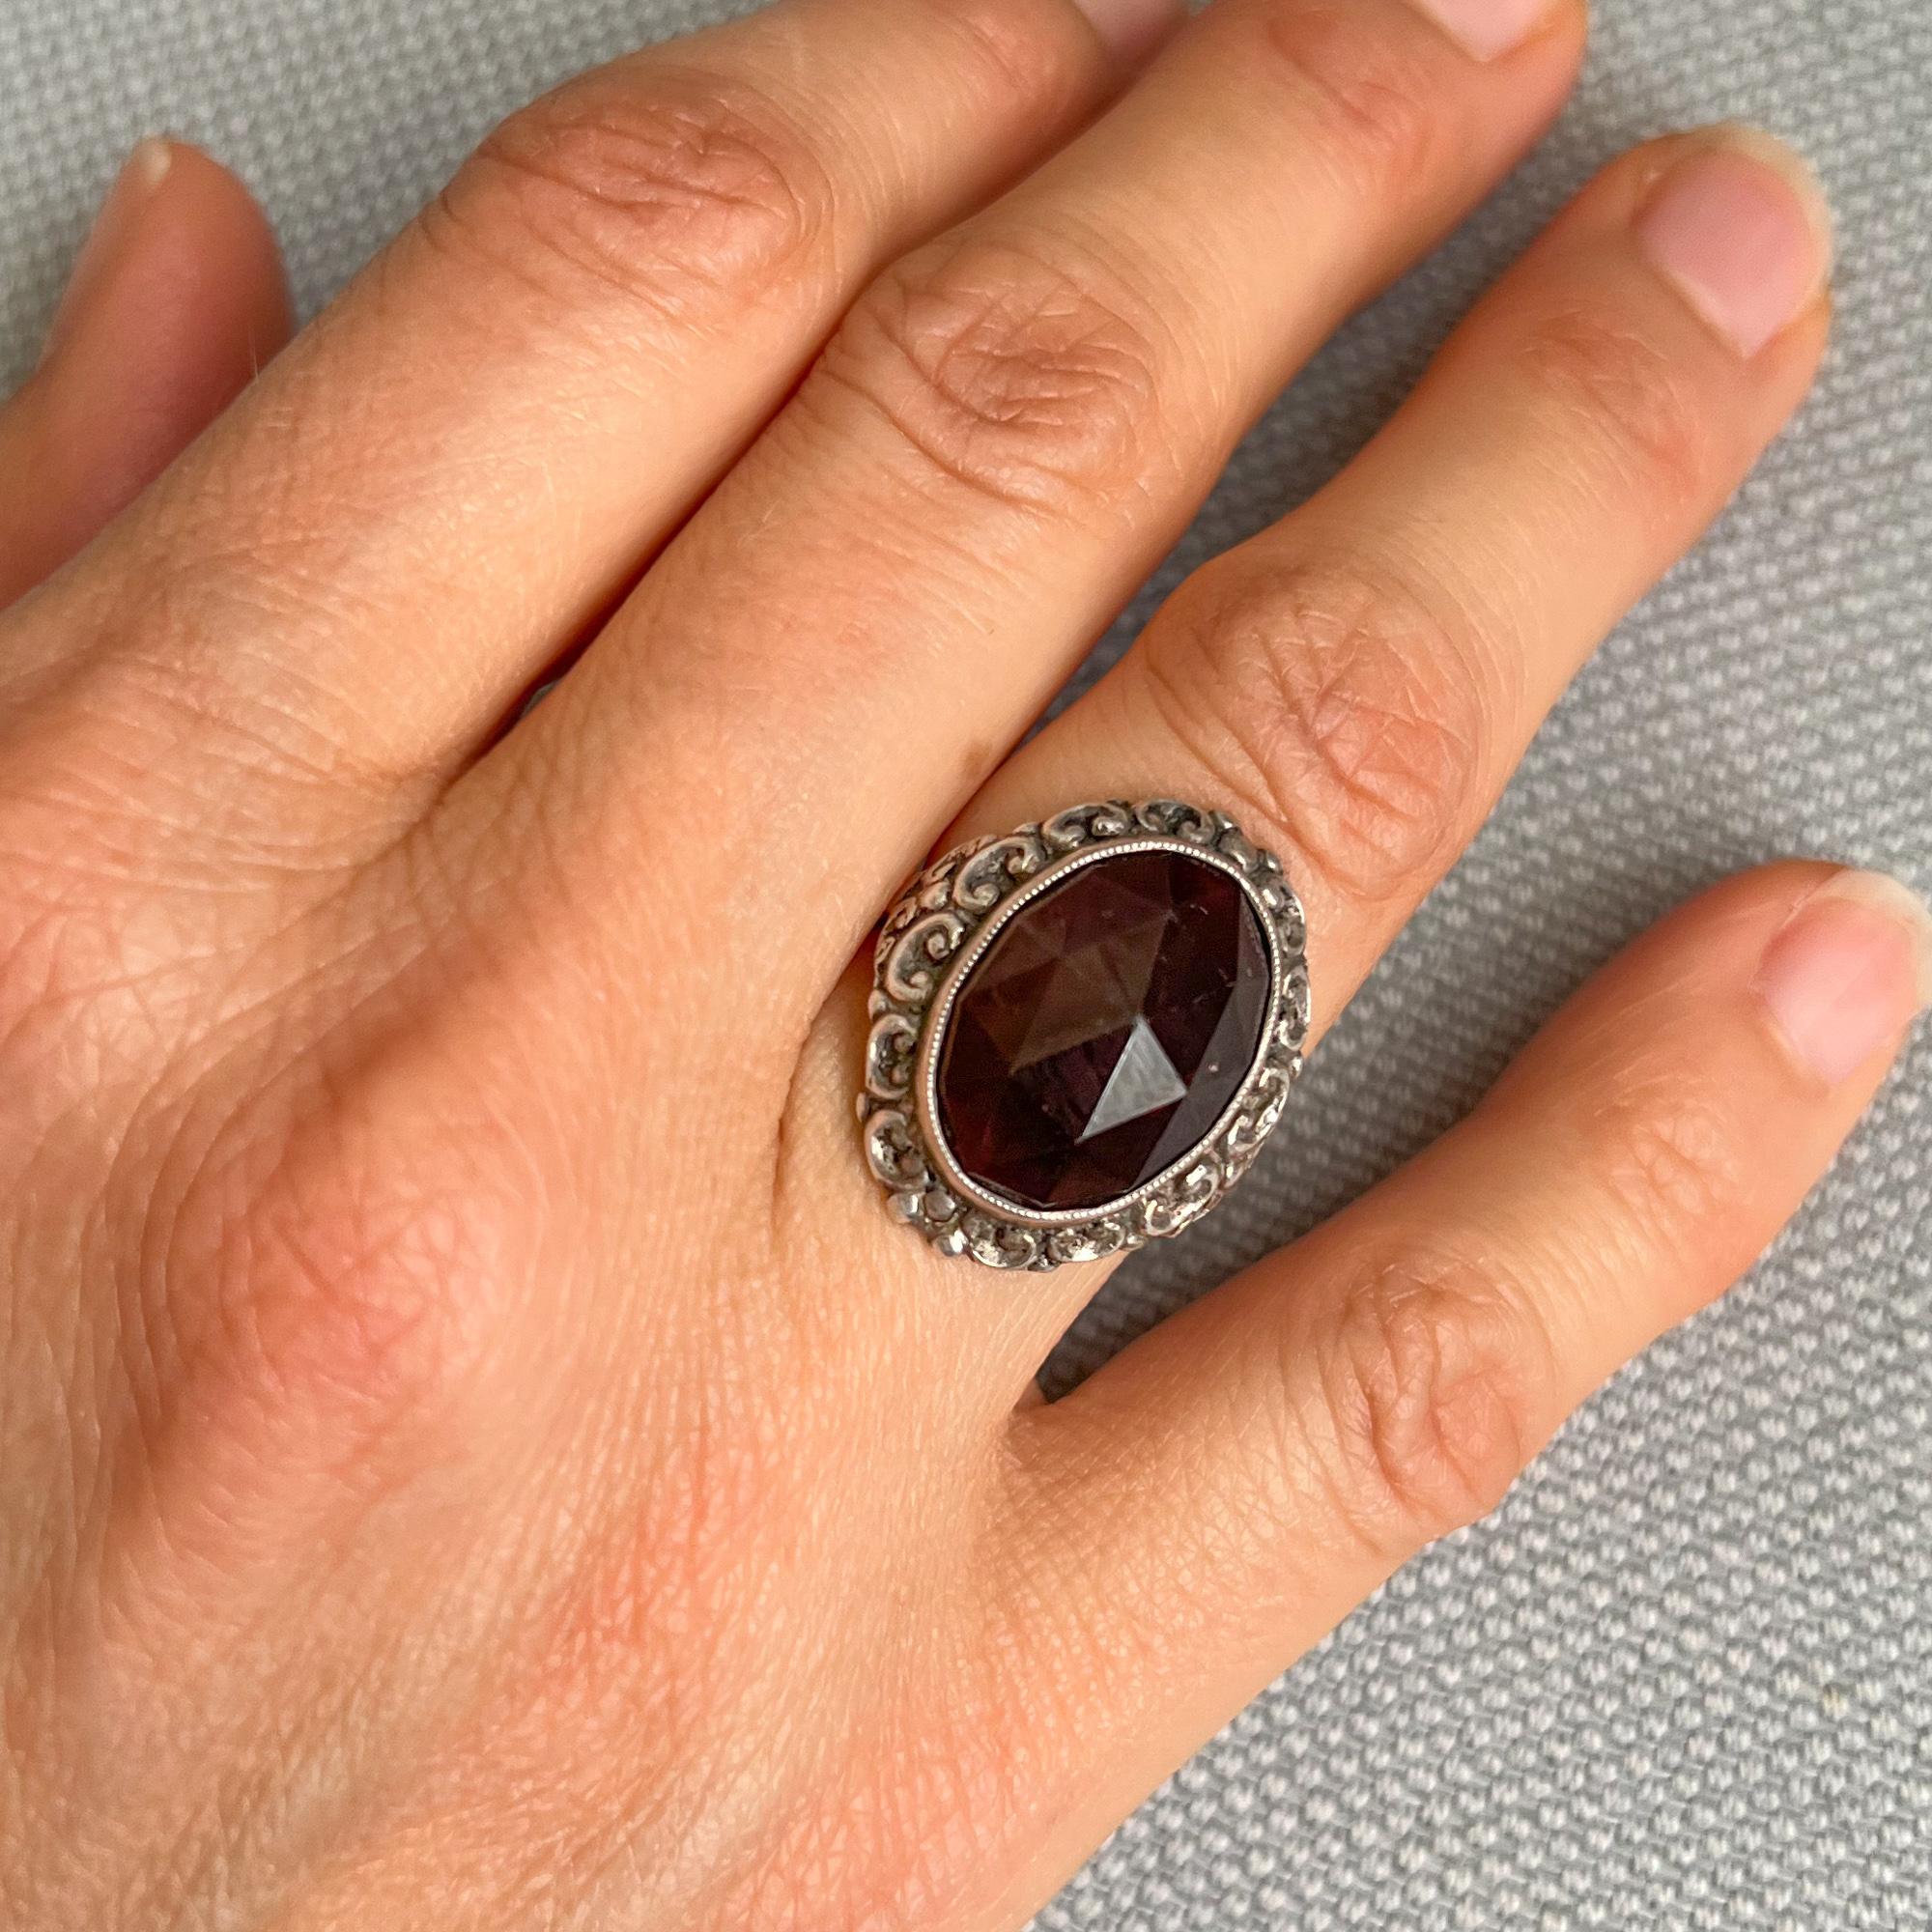 A preloved garnet ring made in silver. The silver oval shaped ring is set with a faceted garnet stone. The ring has a great design with one large oval garnet stone set in a silver ornate border of chased and curled motifs. The beauty of gemstones,